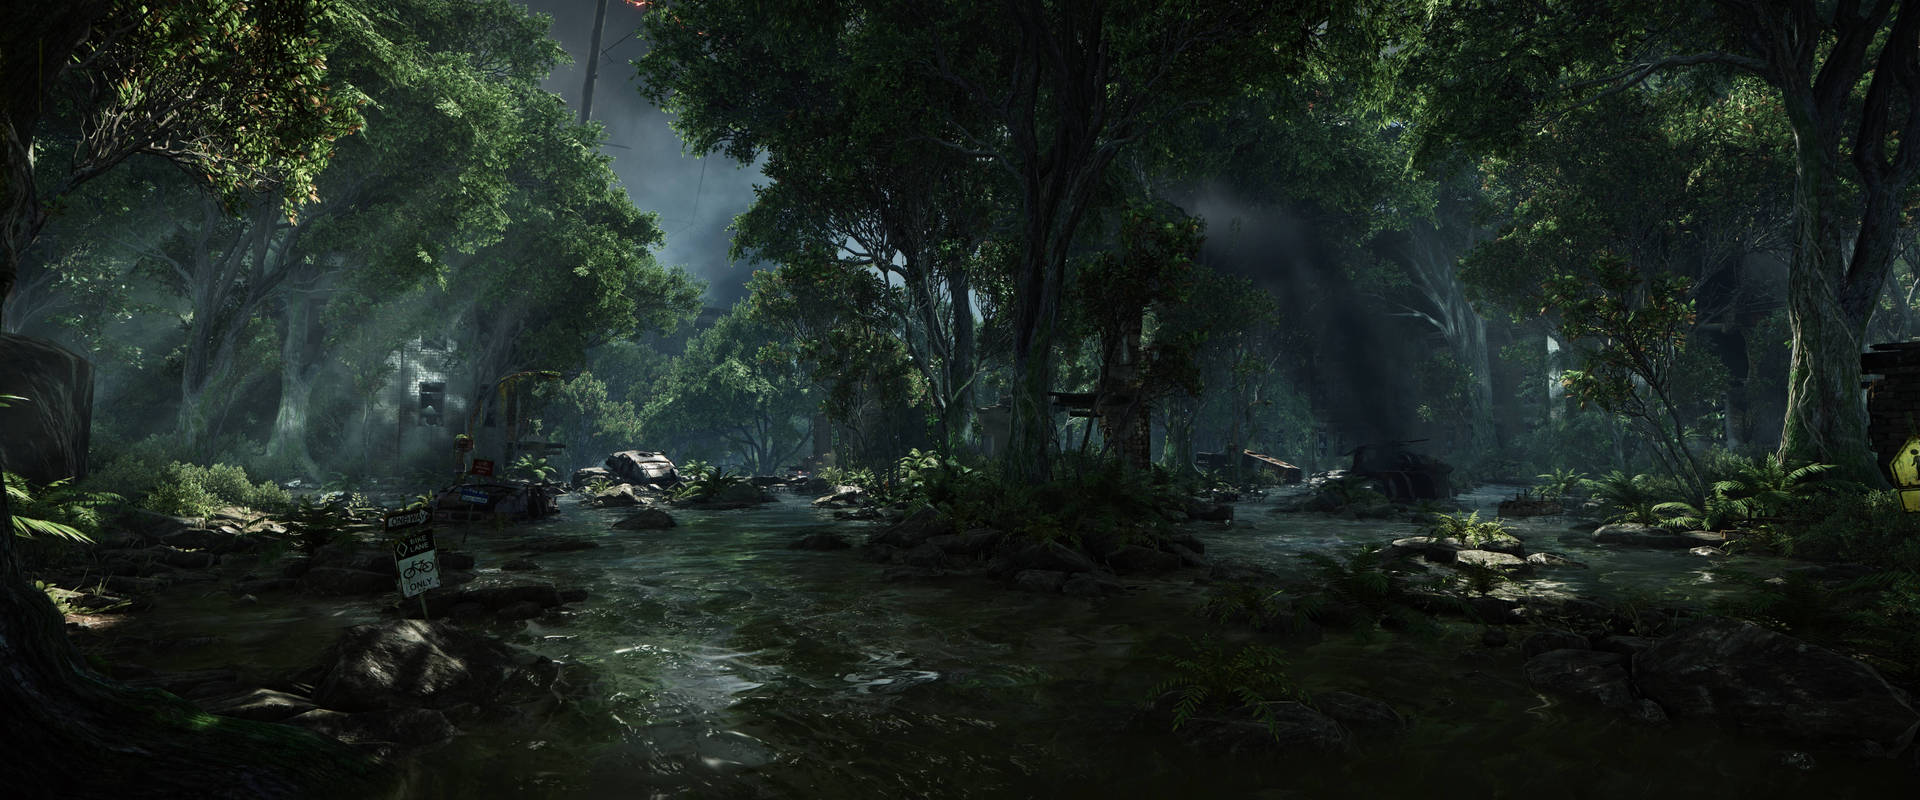 Secluded and abandoned forest from Crysis video game in dual monitor image wallpaper.